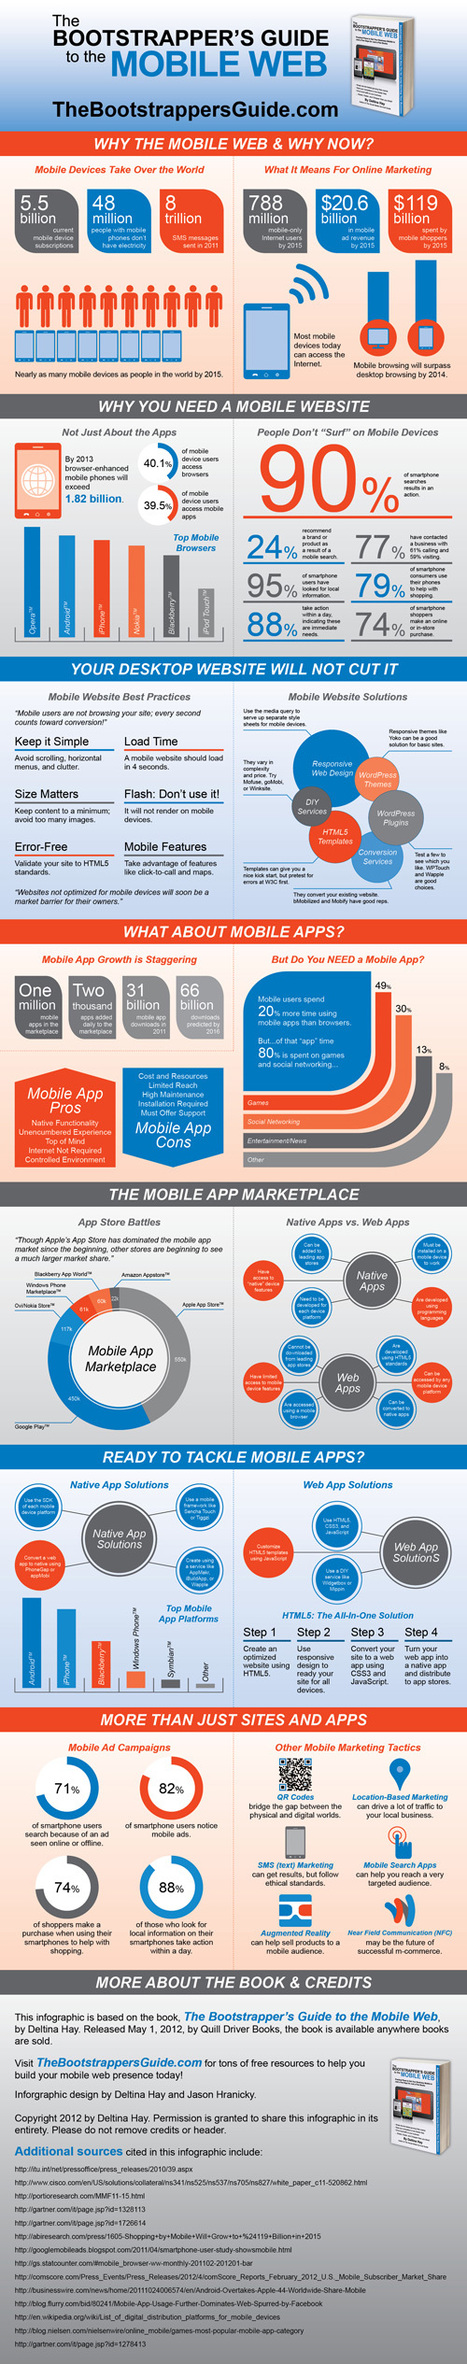 The Ultimate Mobile Web Infographic #mobile | MobileWeb | Scoop.it